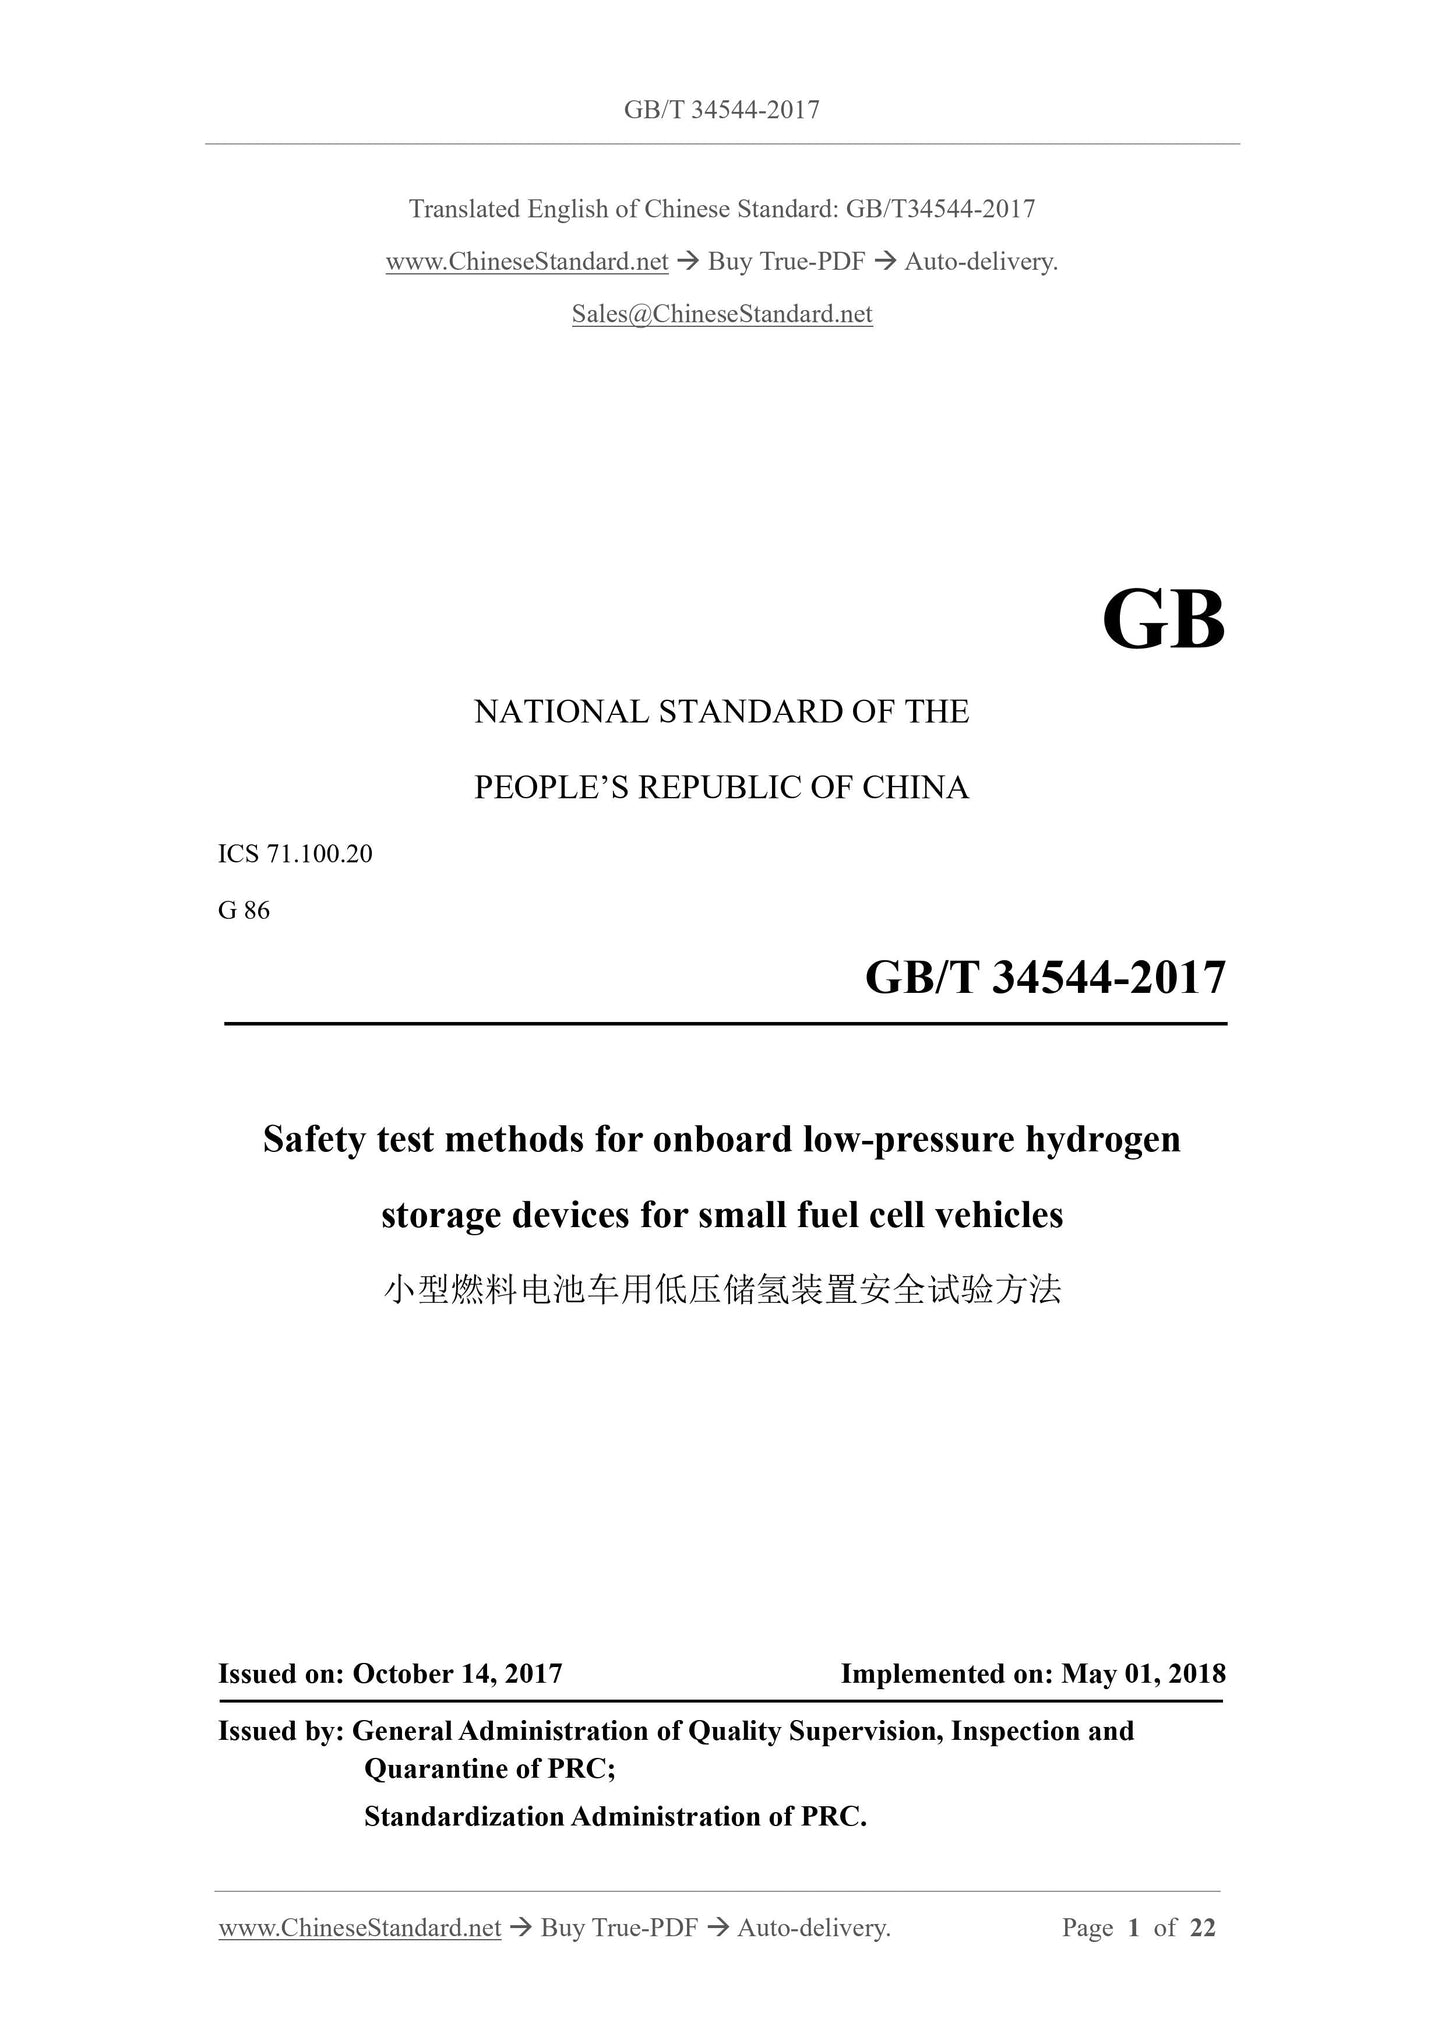 GB/T 34544-2017 Page 1